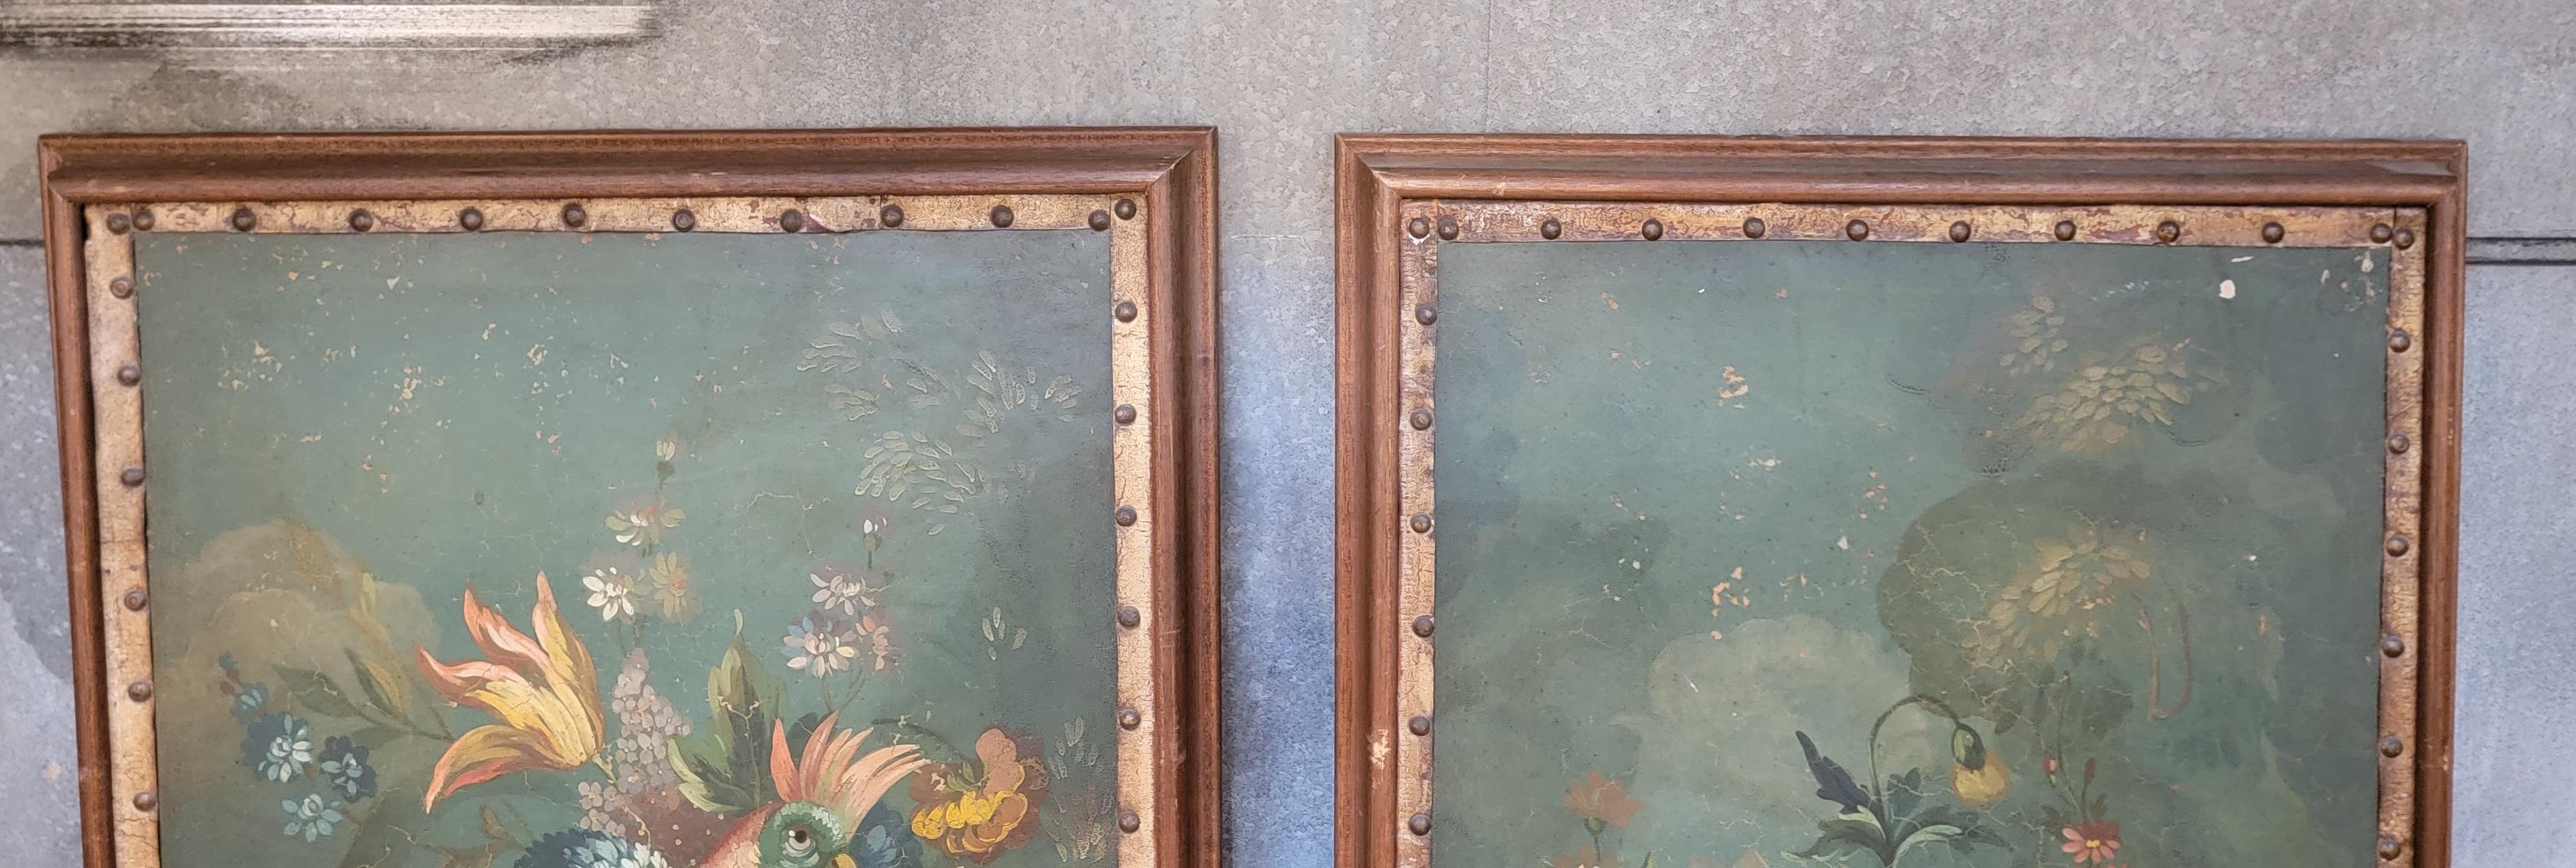 Floral & Parrot Wall Panels / Paintings 1920's For Sale 1